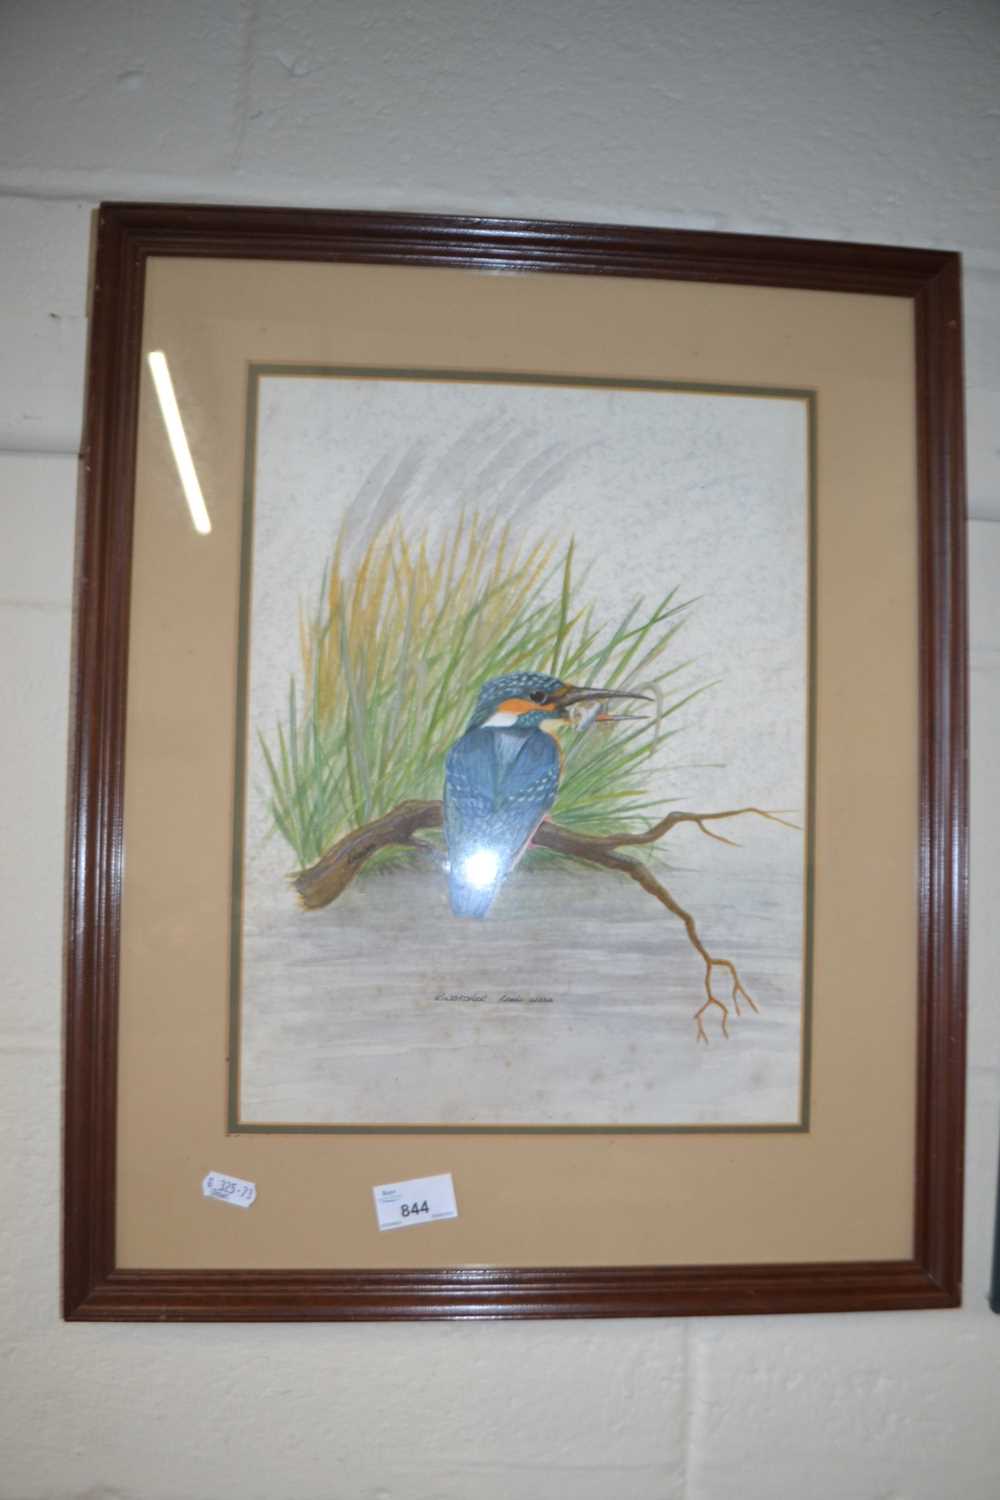 Study of a kingfisher, watercolour, framed and glazed